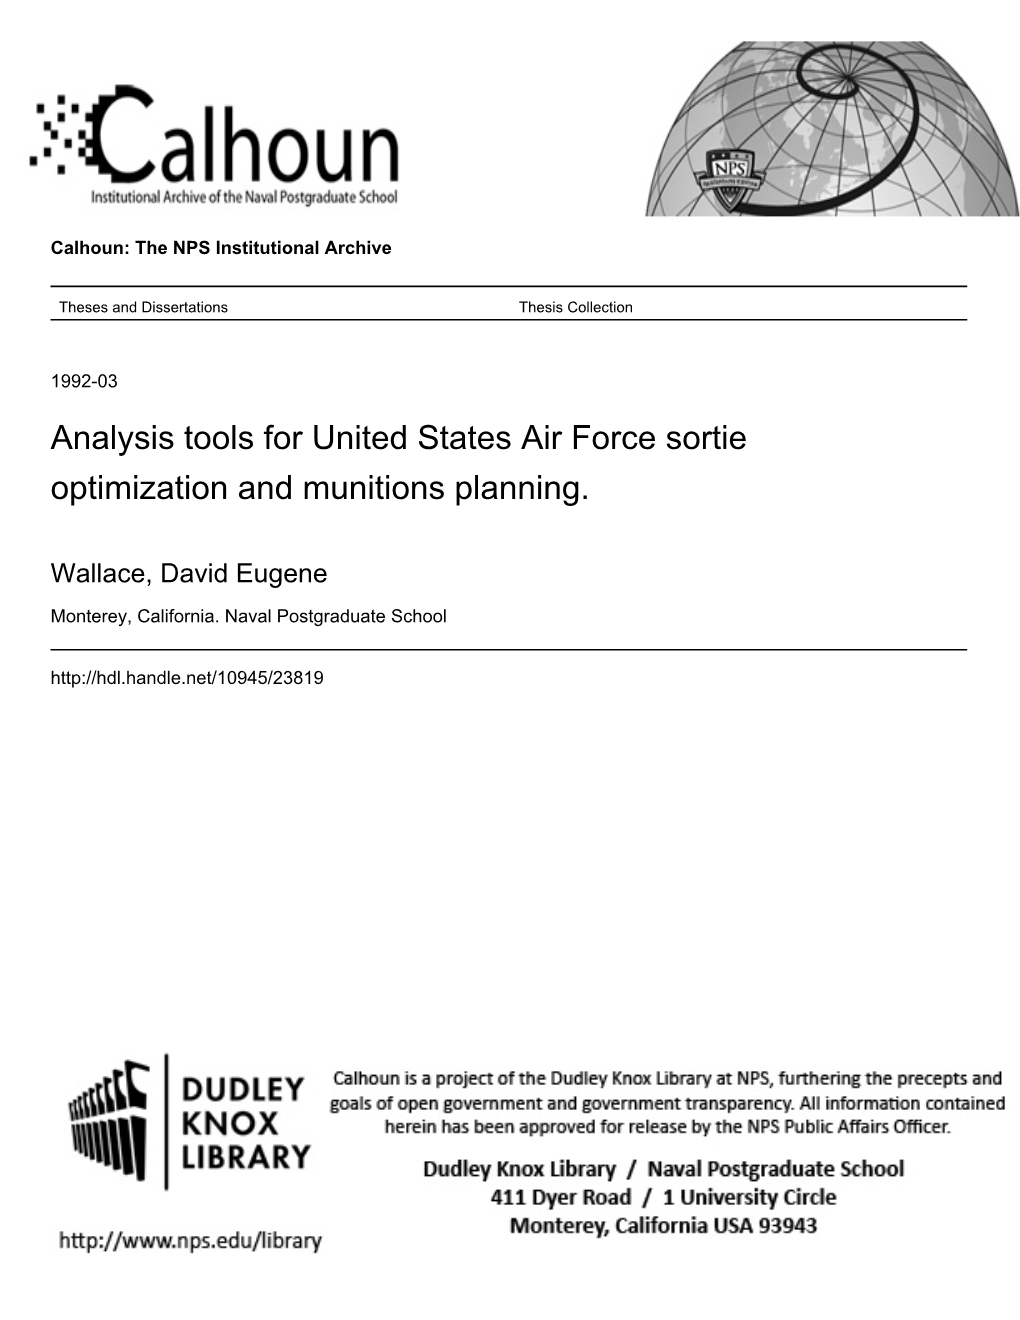 Analysis Tools for United States Air Force Sortie Optimization and Munitions Planning